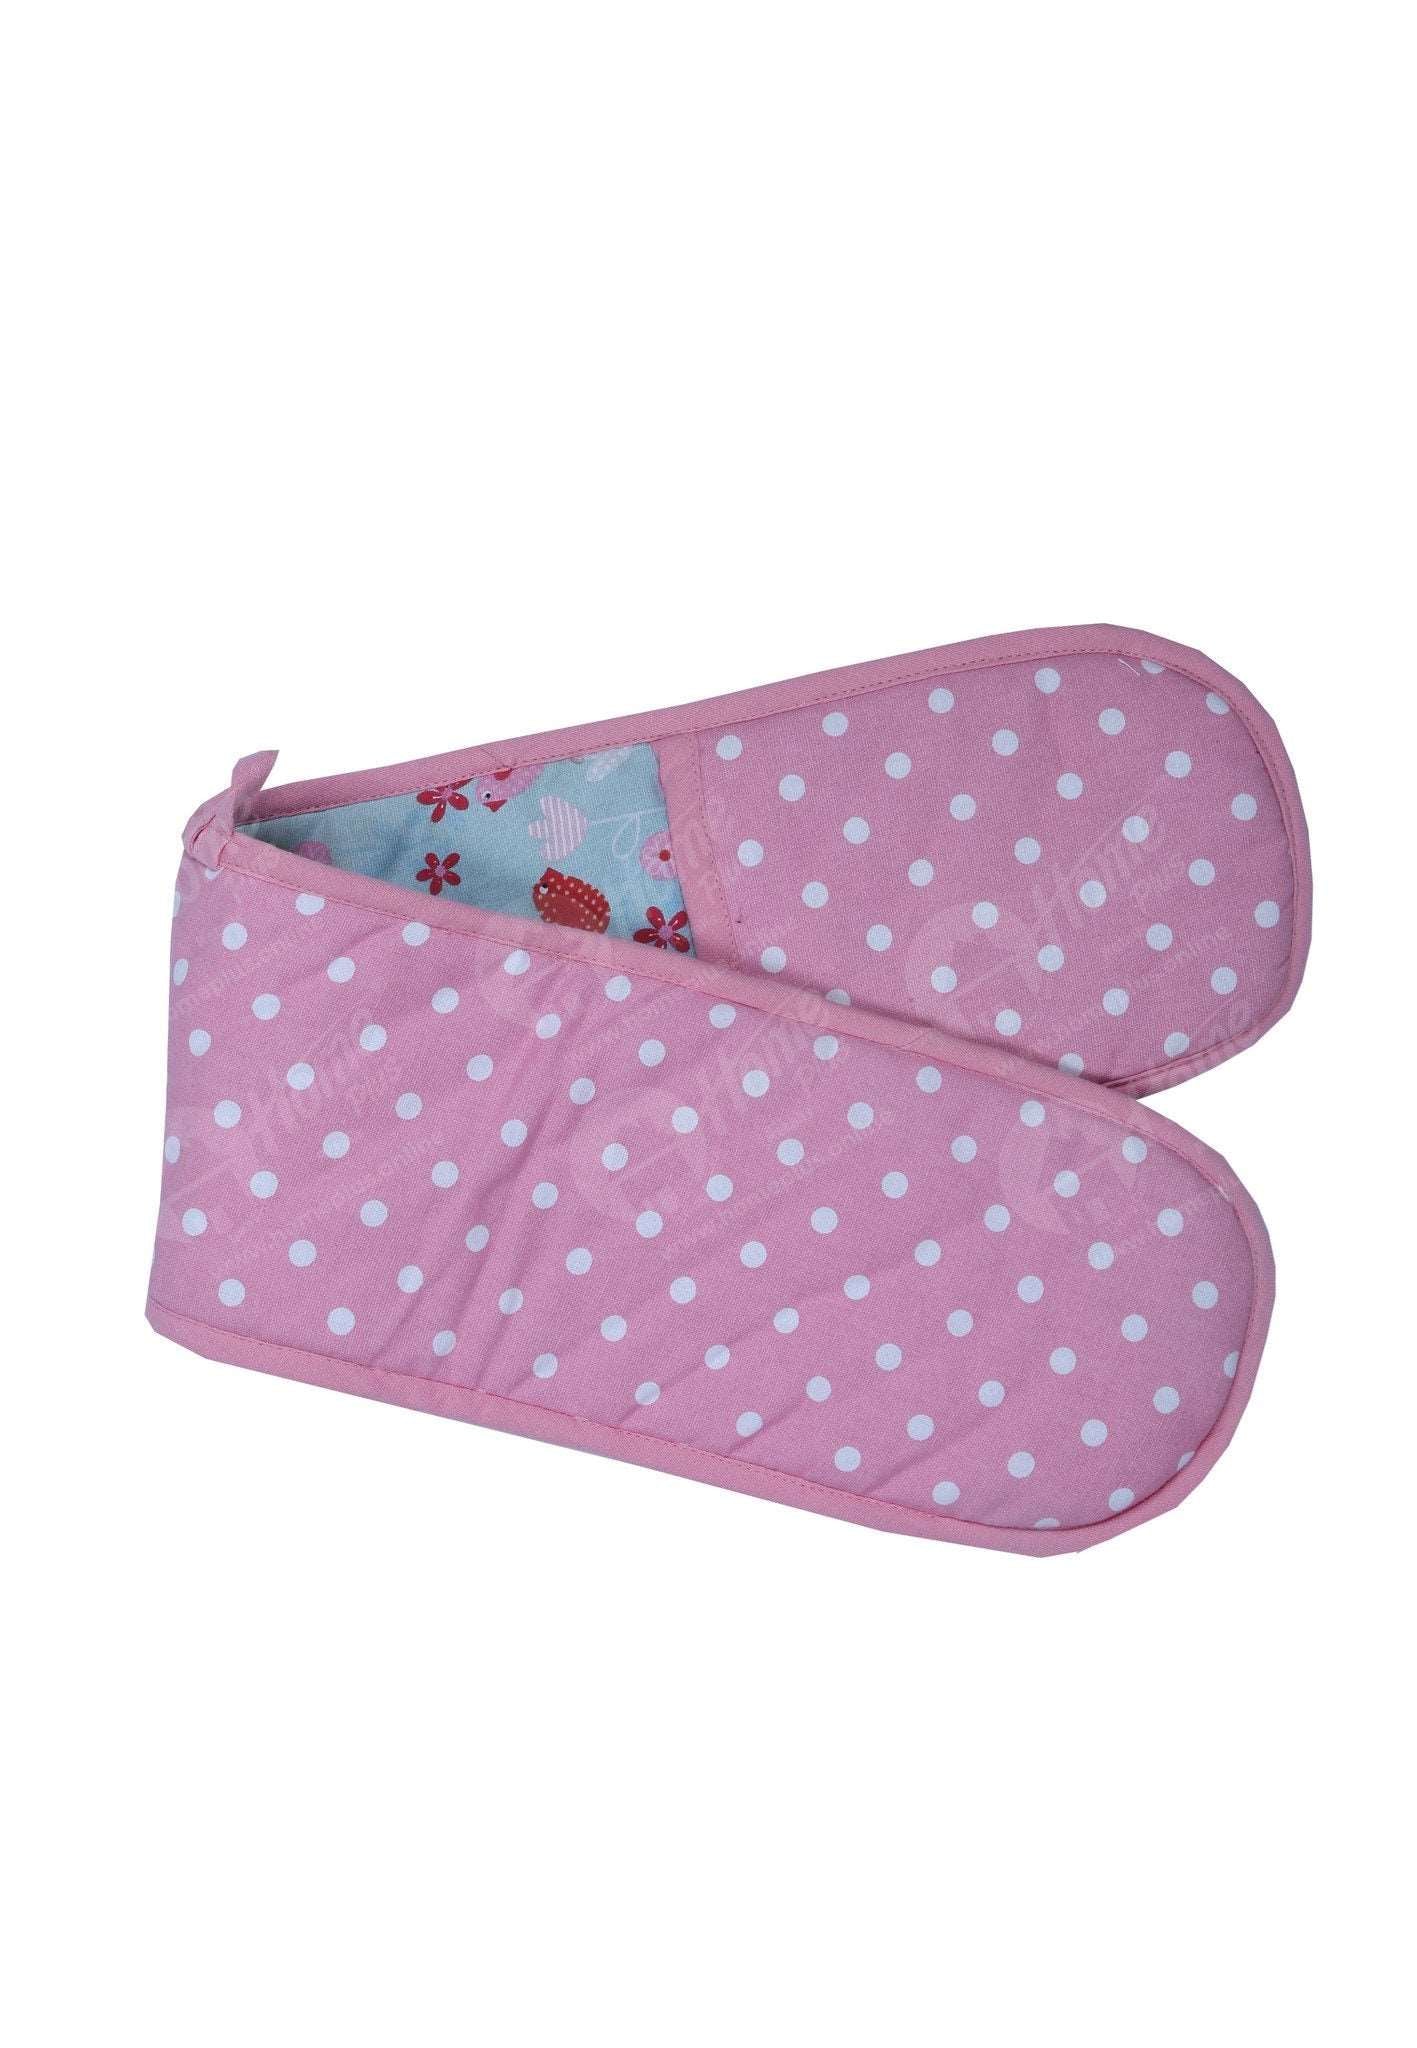 Double Oven Gloves - Polka Dot Pink